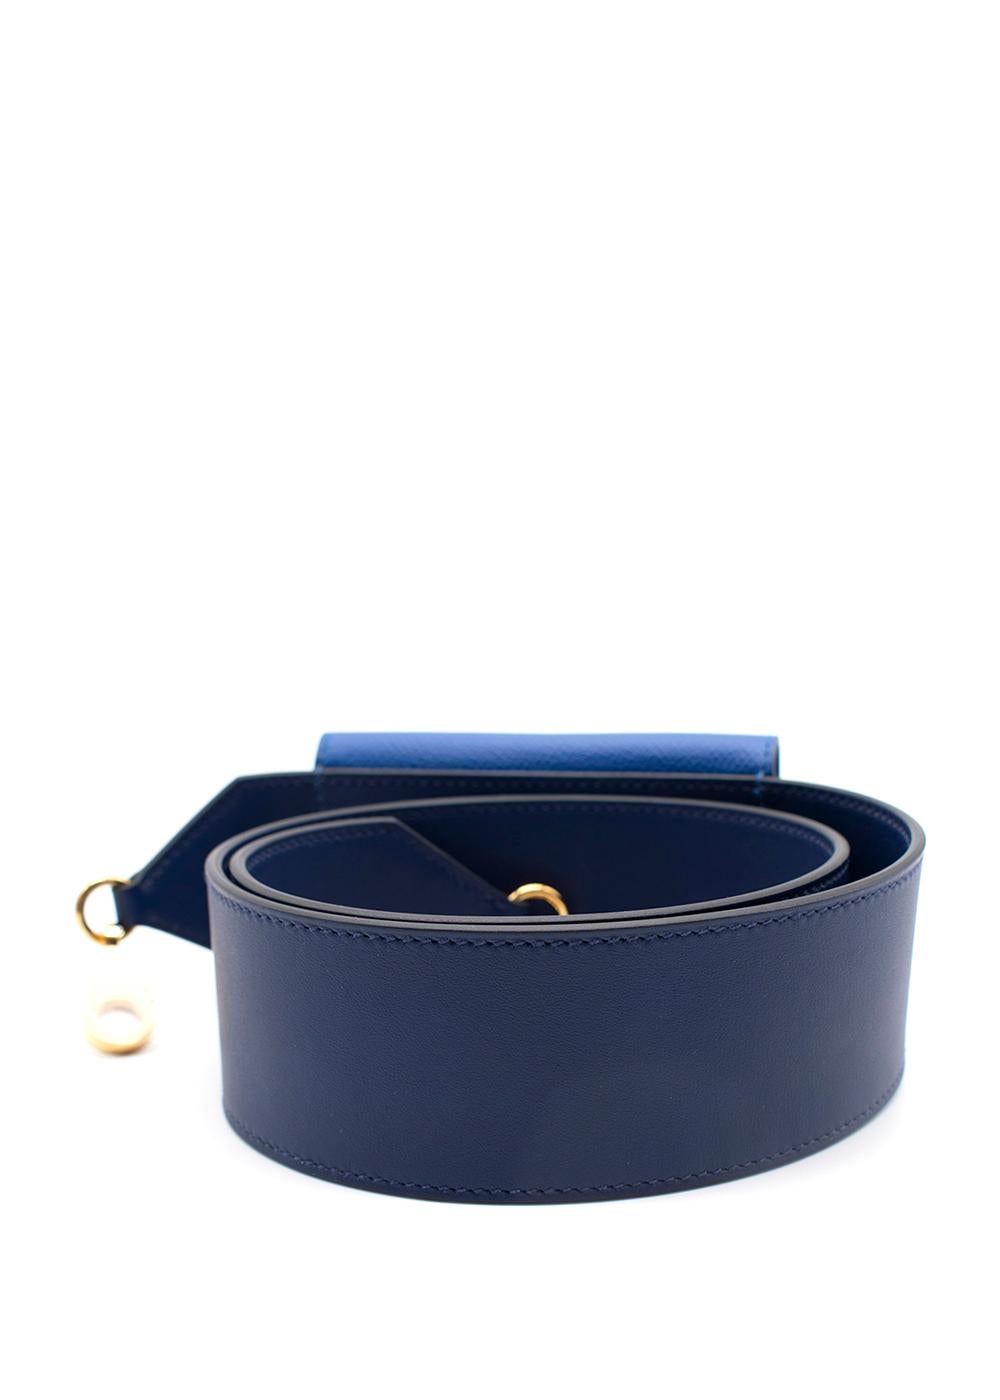 Hermes Blue Sapphire & Zellige Swift/Epsom 75cm Kelly Pocket Strap GHW

Date stamp: Z 2021

- Bicolour Kelly pocket strap in a rich sapphire blue, and inky zellige hue
- Palladium plated turnlock and clip ends

Materials:
Leather
Palladium

75 cm